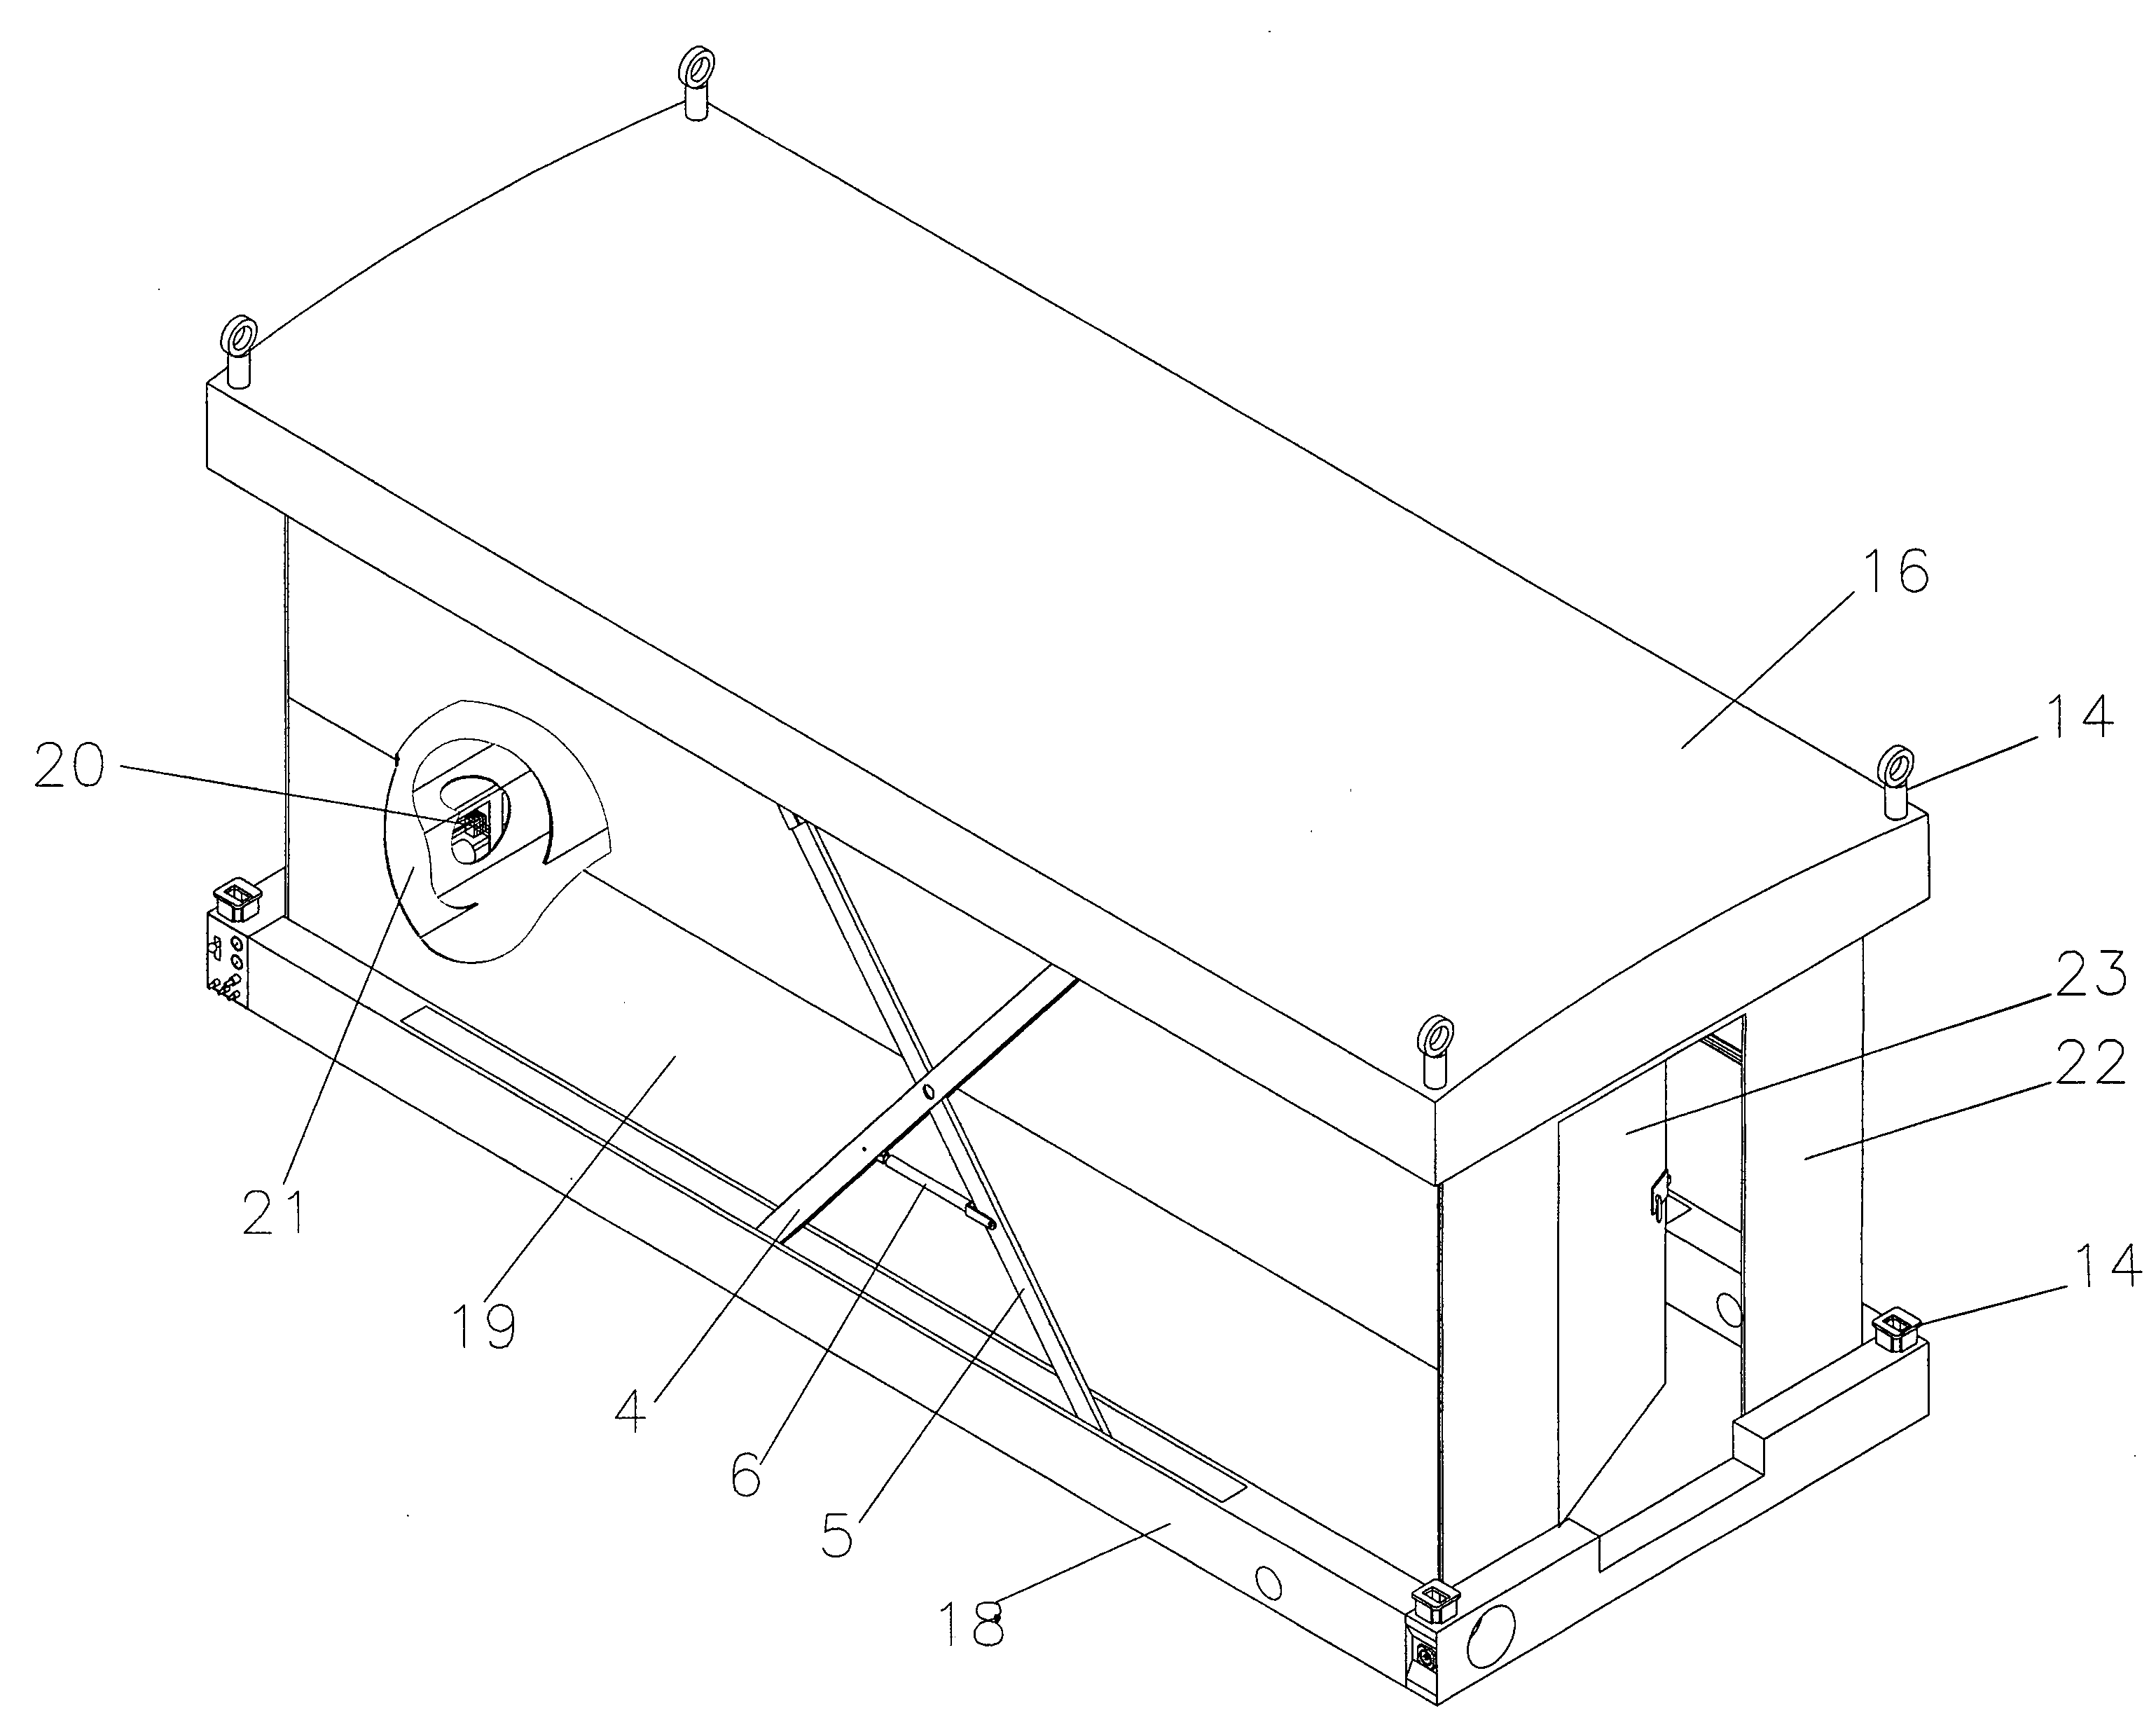 Callapsible shed